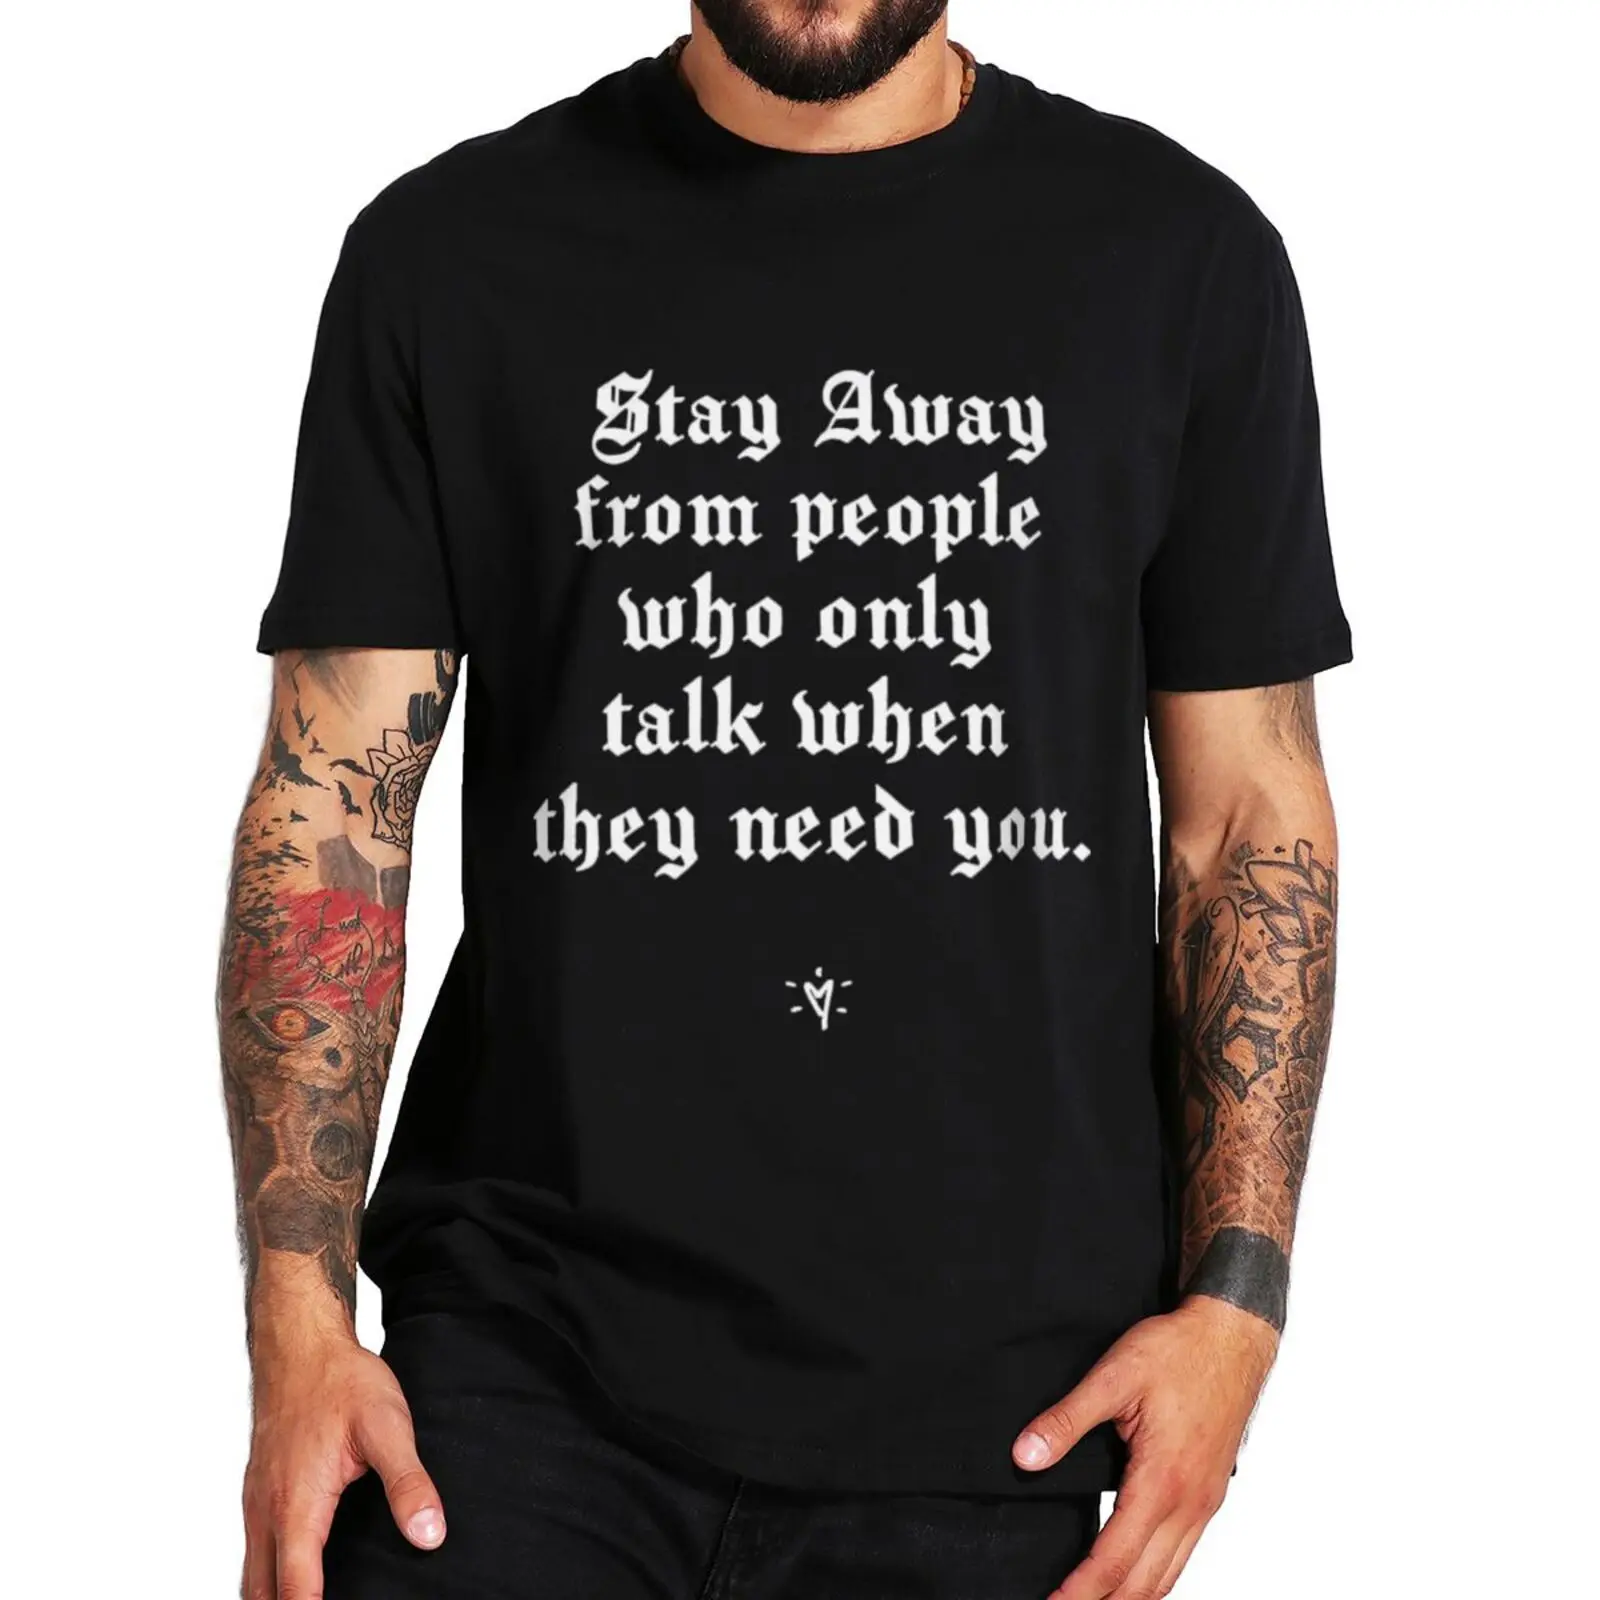 

Stay Away From People Who Talk When They Need You T Shirt Funny Humor Jokes Tops 100% Cotton Unisex Soft Casual T-shirt EU Size